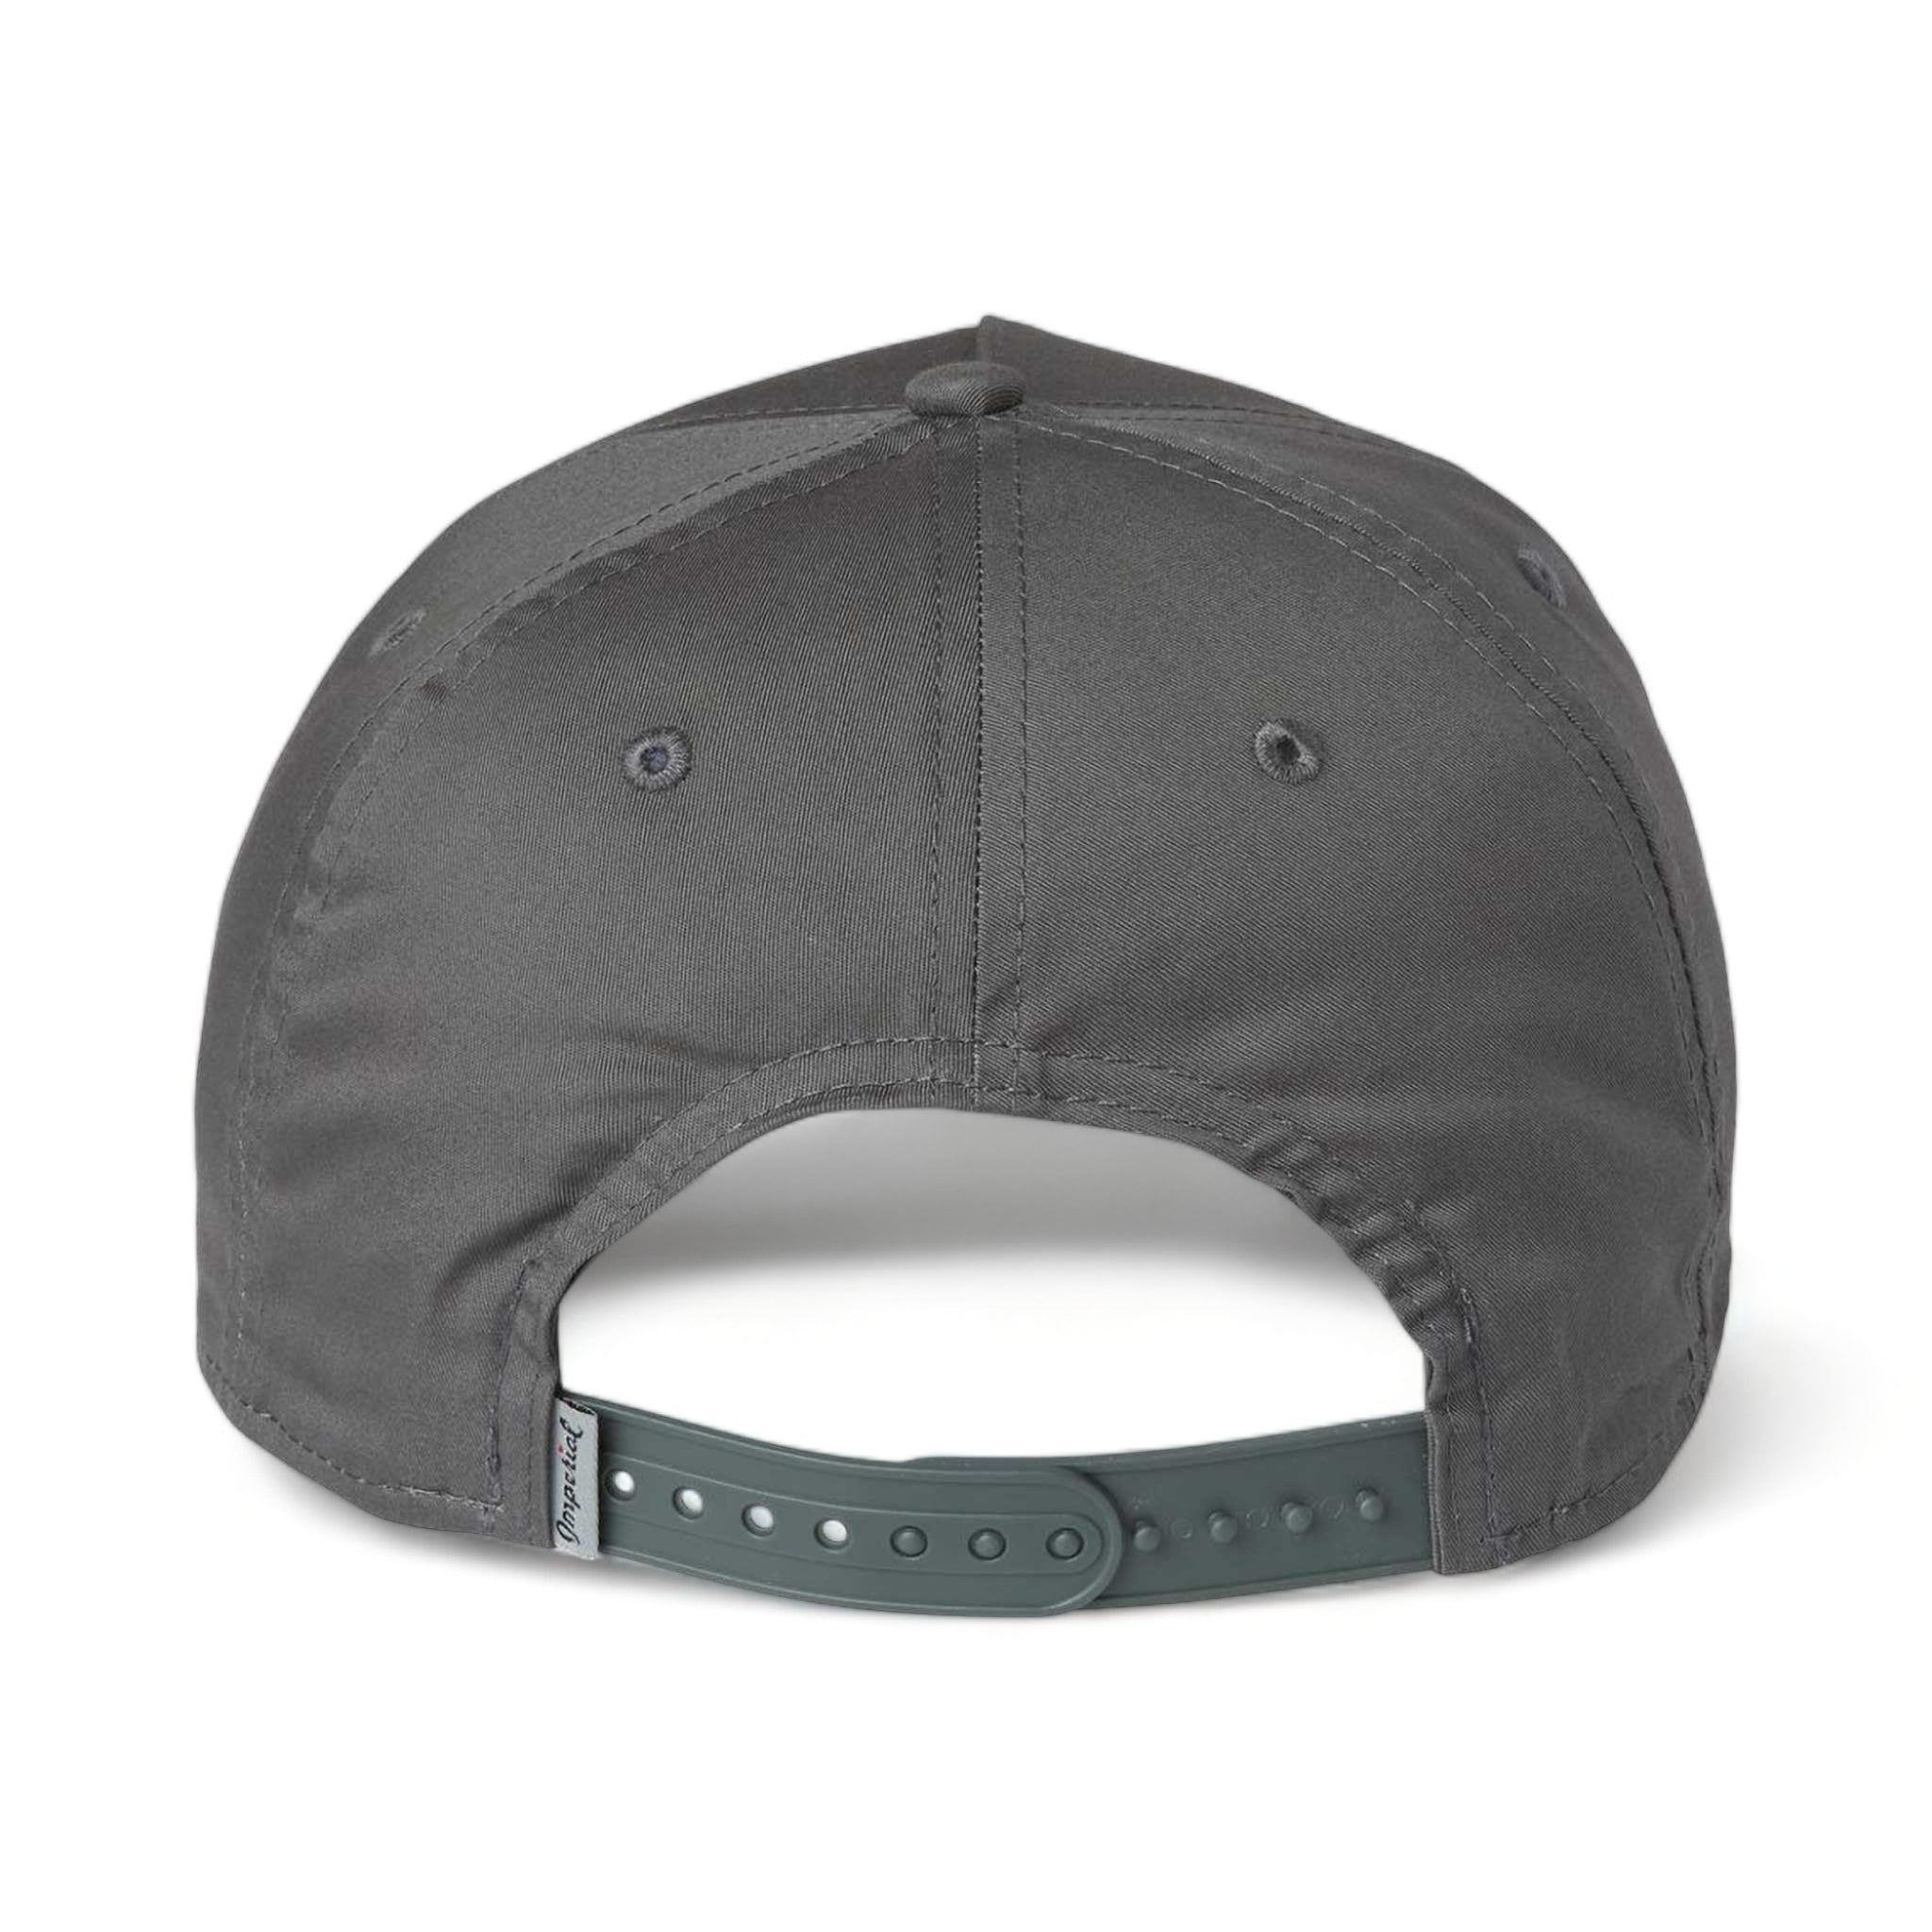 Back view of Imperial 5056 custom hat in graphite and black